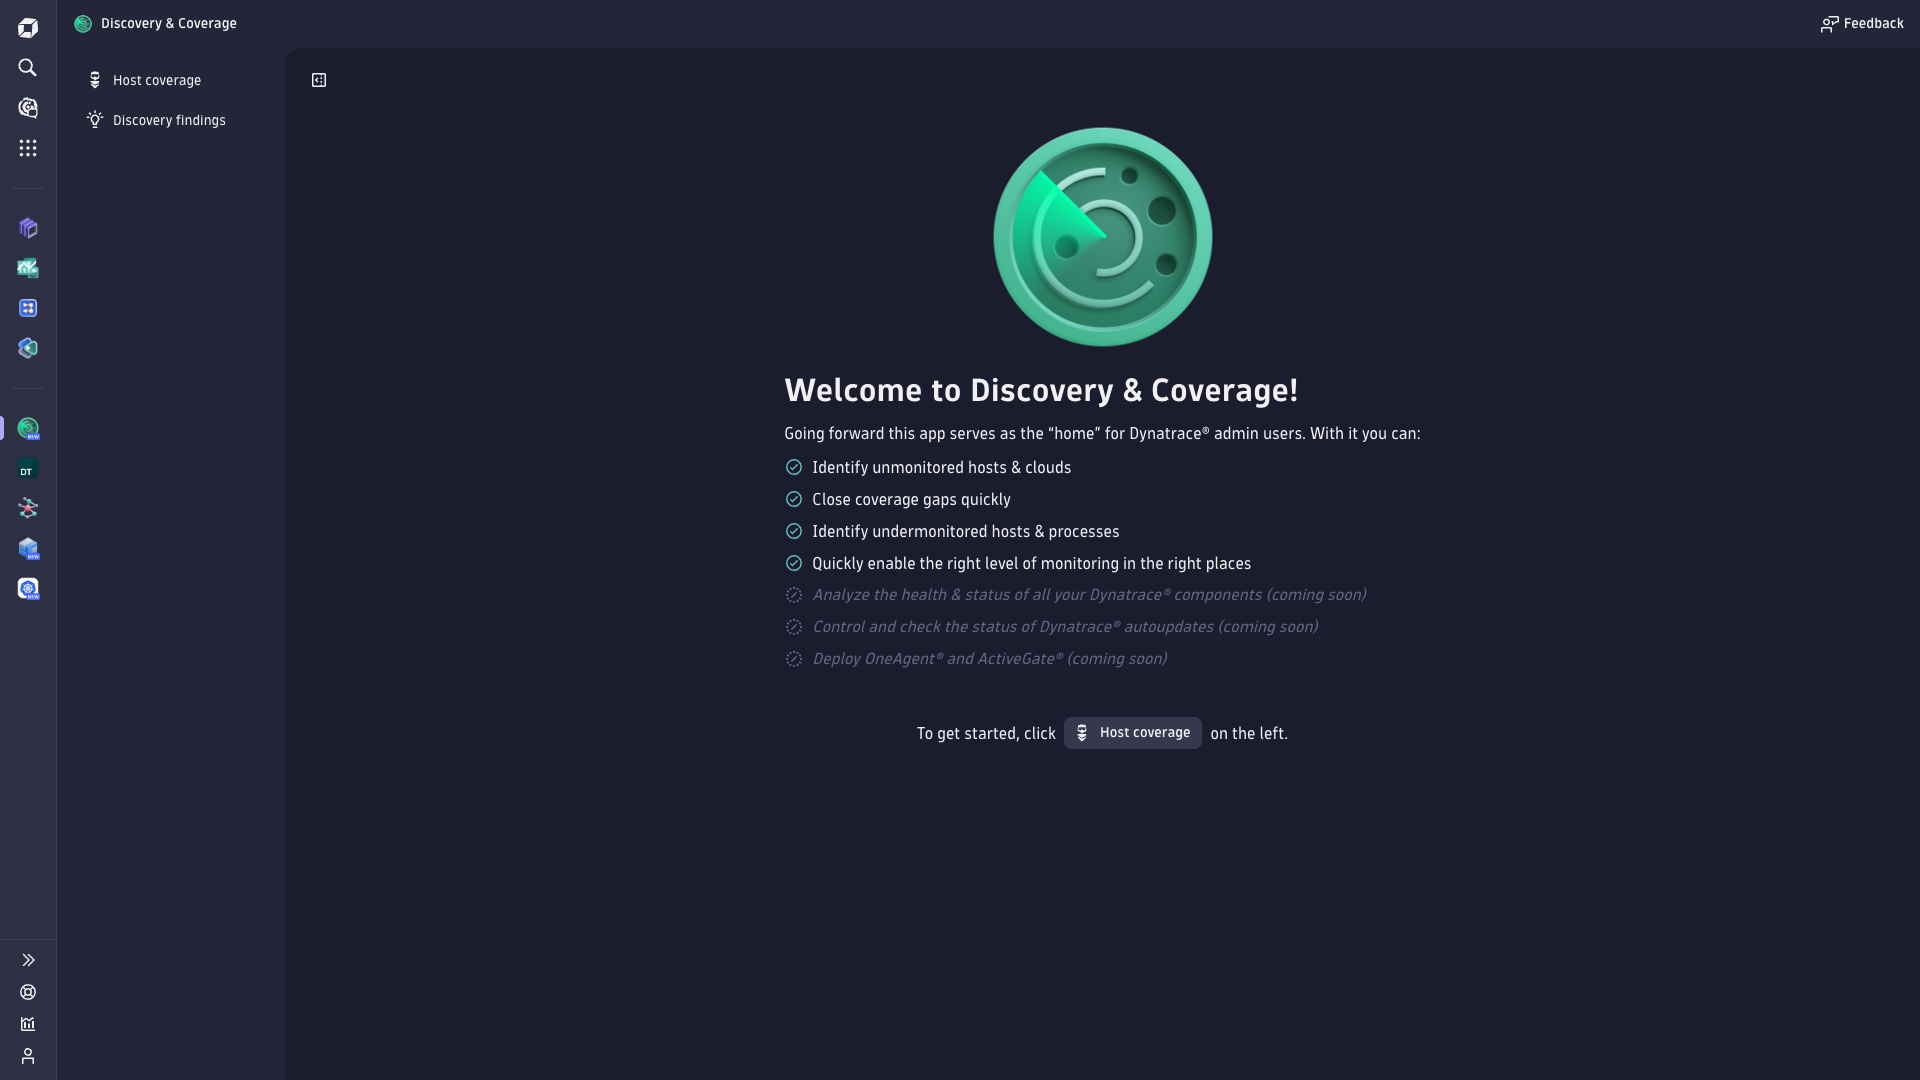 Welcome to Discovery & Coverage.